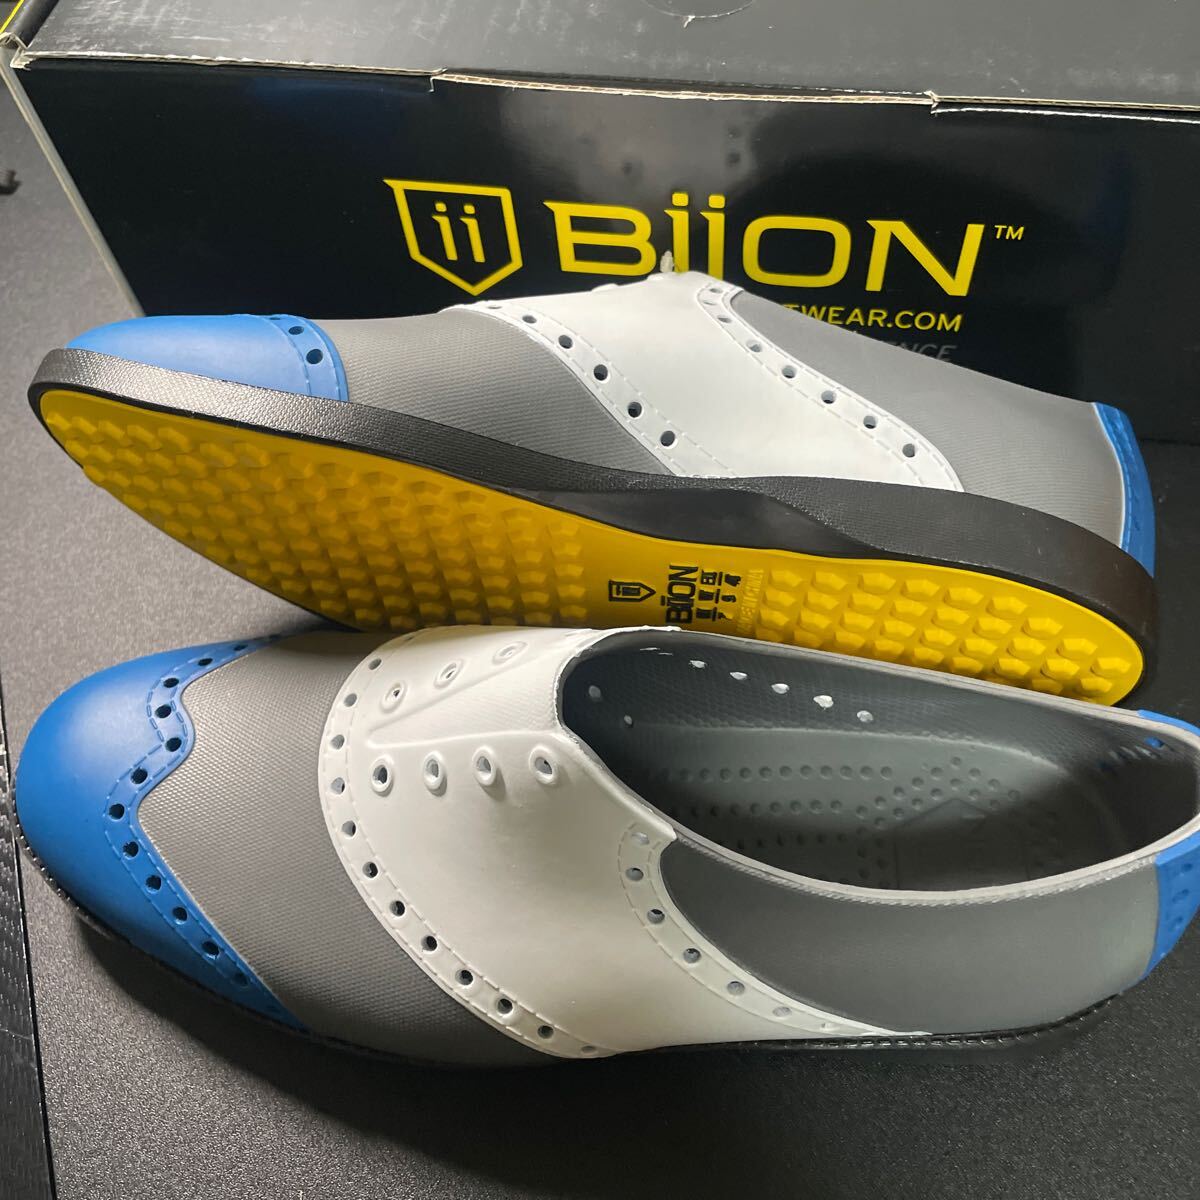 hz59 new goods unused goods light weight slip-on shoes golf shoes Golf 25.5. Vaio nBIION men's lady's spike less EV material popular most new work 